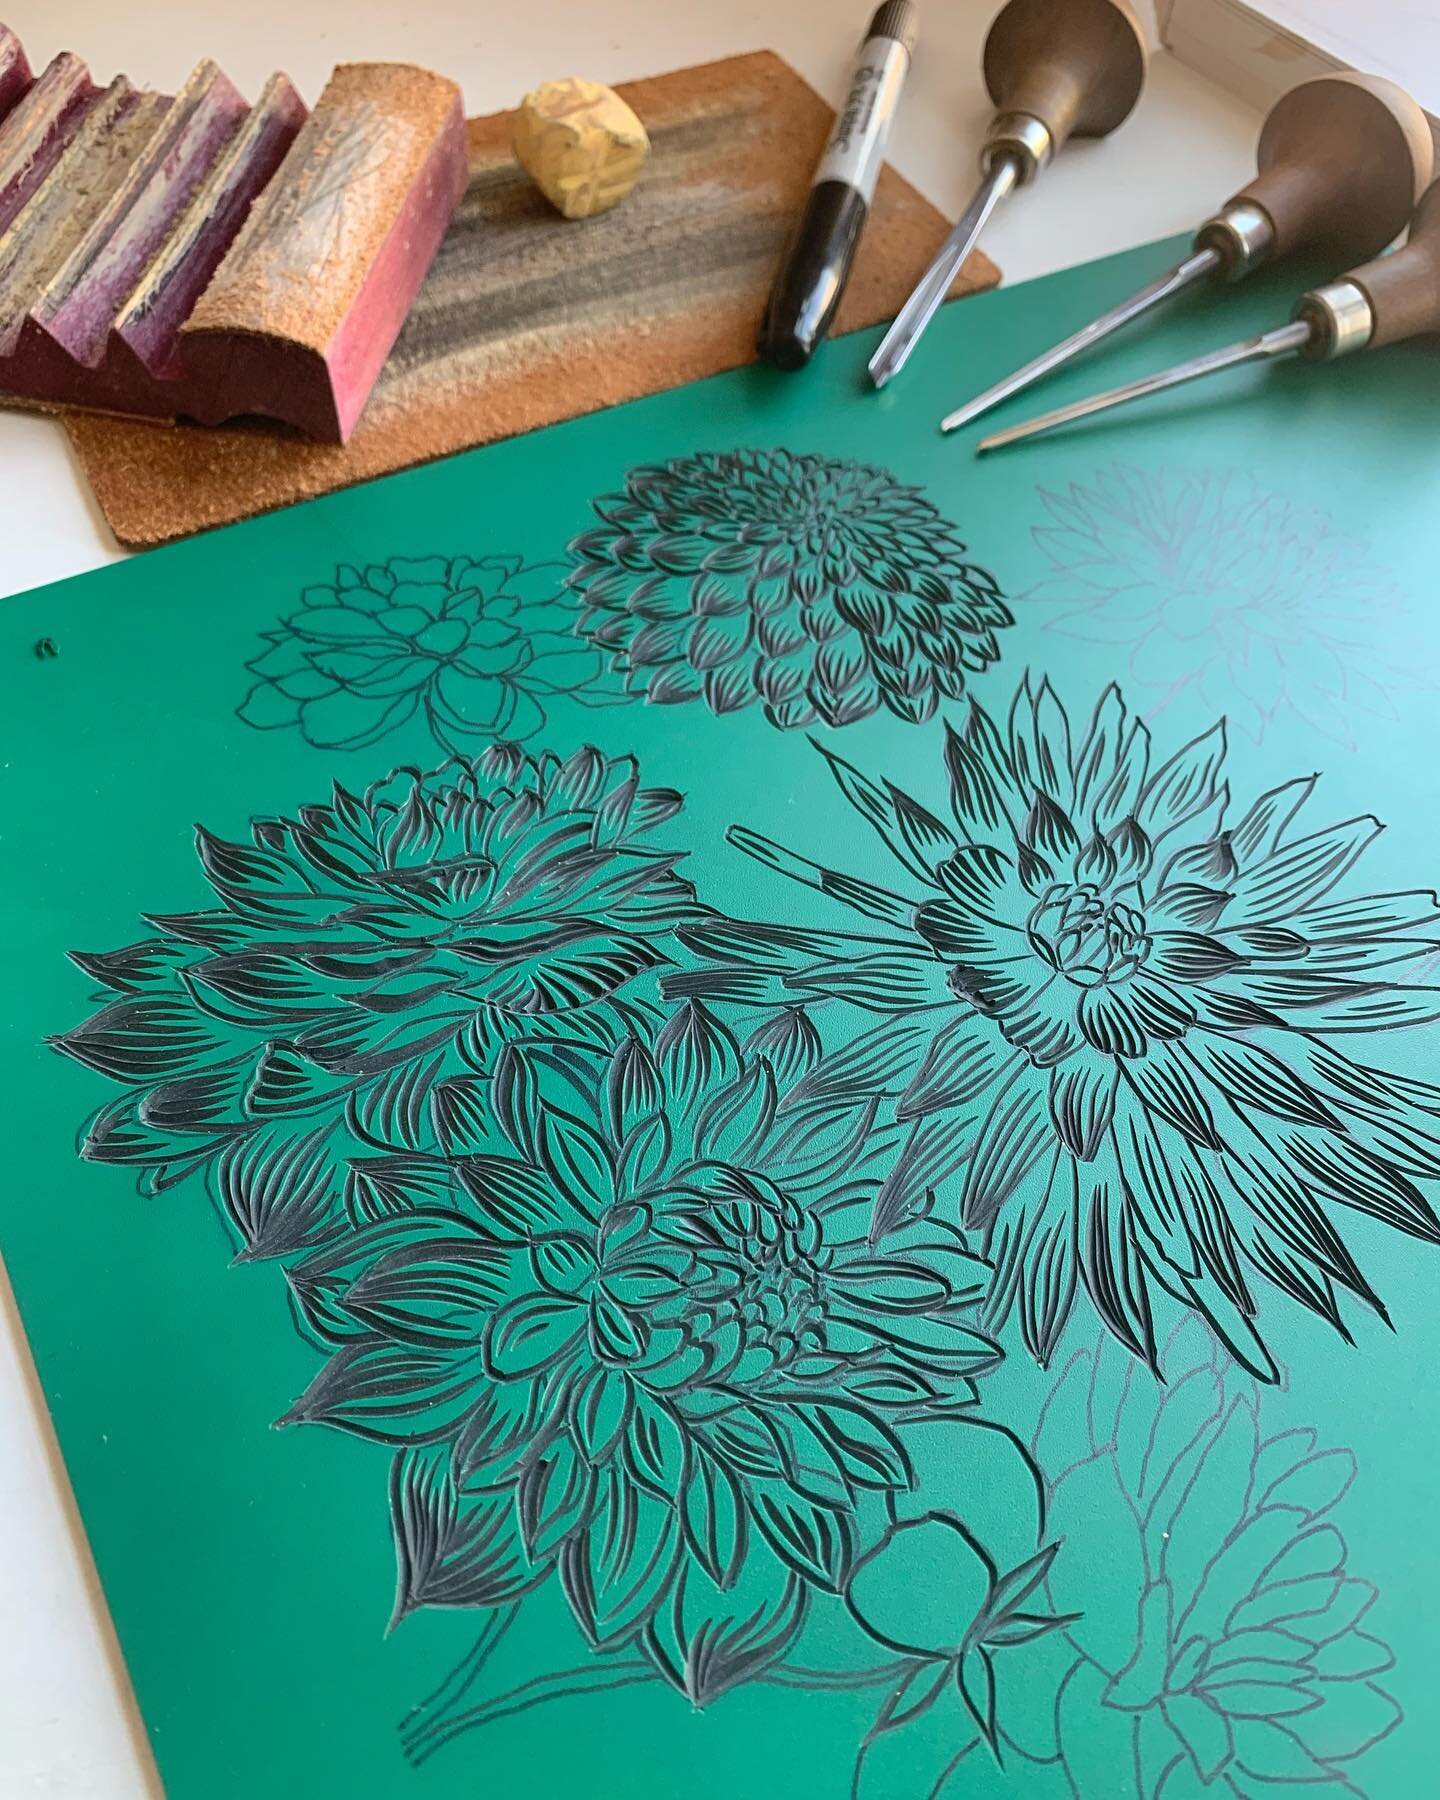 Work in progress! 

I&rsquo;ve started a new print with dahlias. One of my favourite flowers. 

I&rsquo;ve grown some of my own from seed but they are tiny flowers. I&rsquo;d love to be able to grow big blooms like these! 
.
.
.
#dahlias #dahliasofin